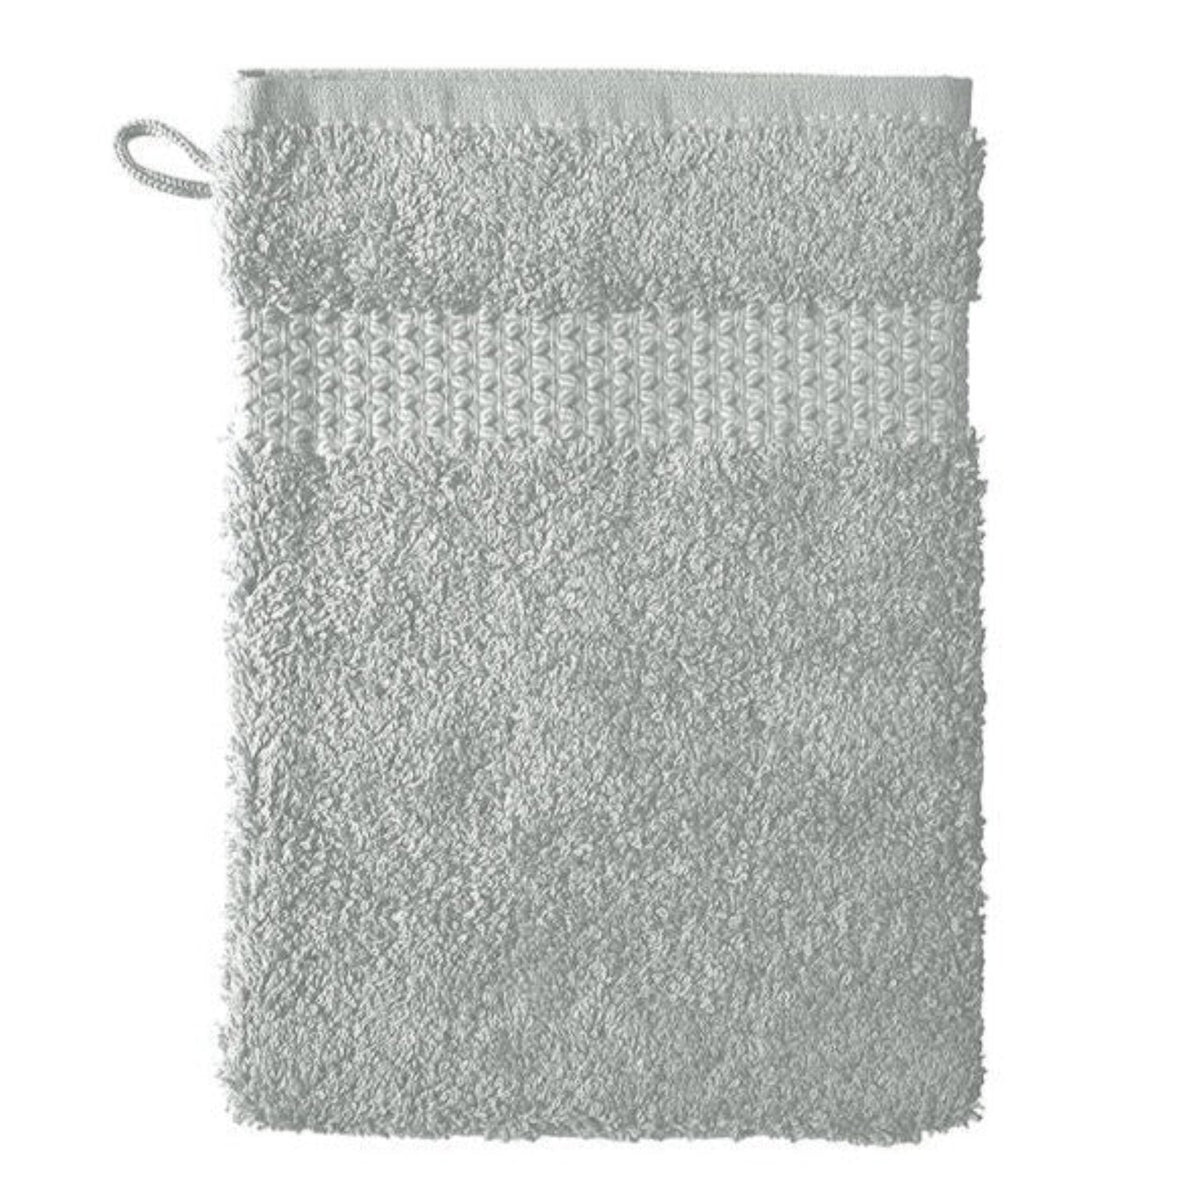 Bath Mitt of Yves Delorme Etoile Bath Collection in Platine Color